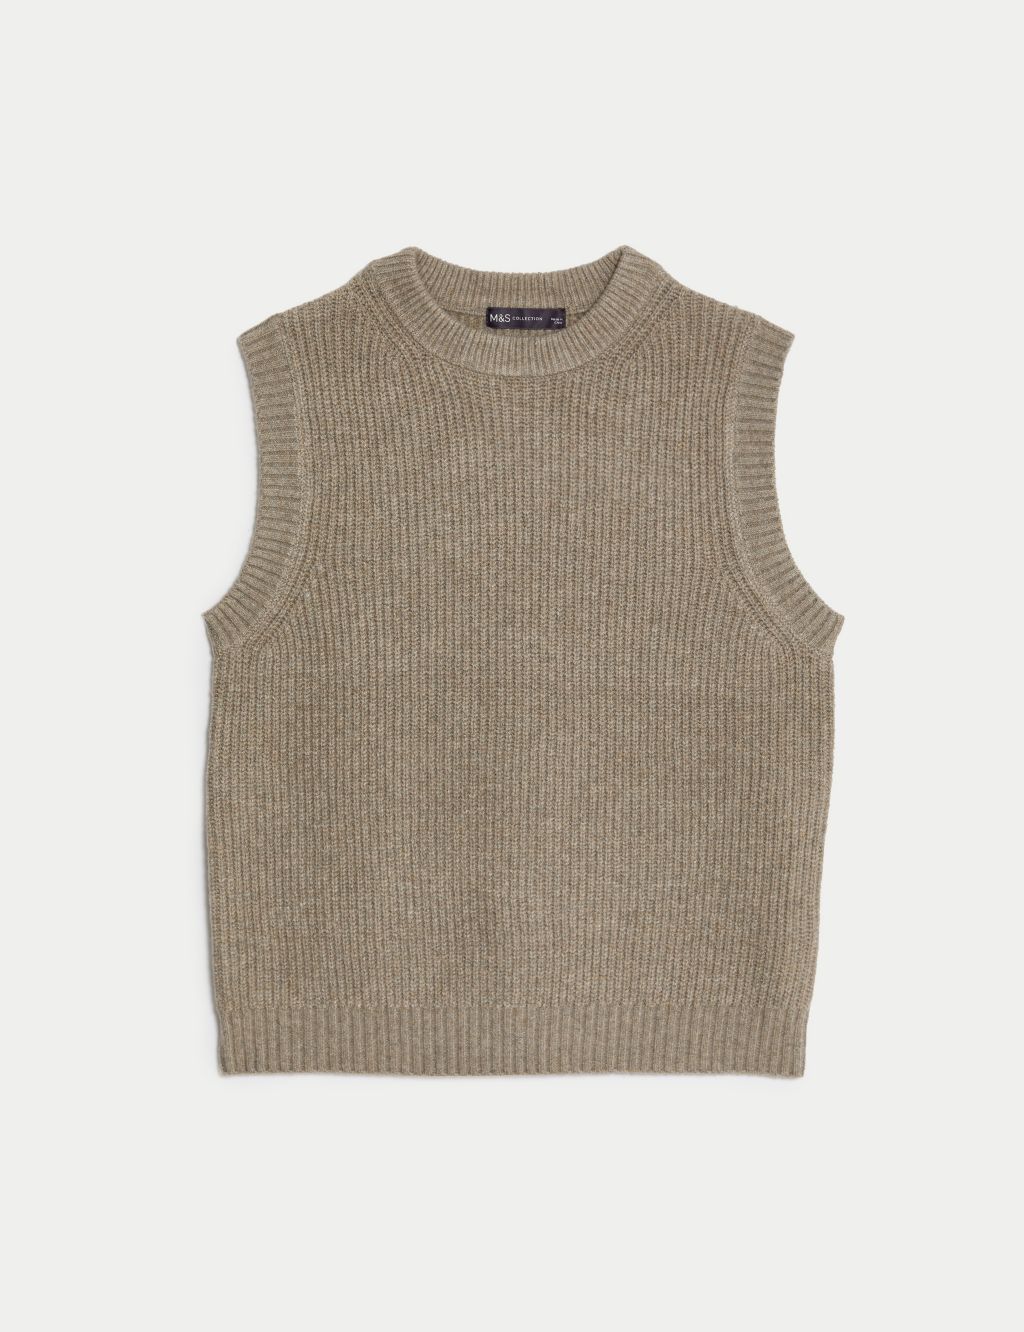 Ribbed Crew Neck Knitted Vest image 2